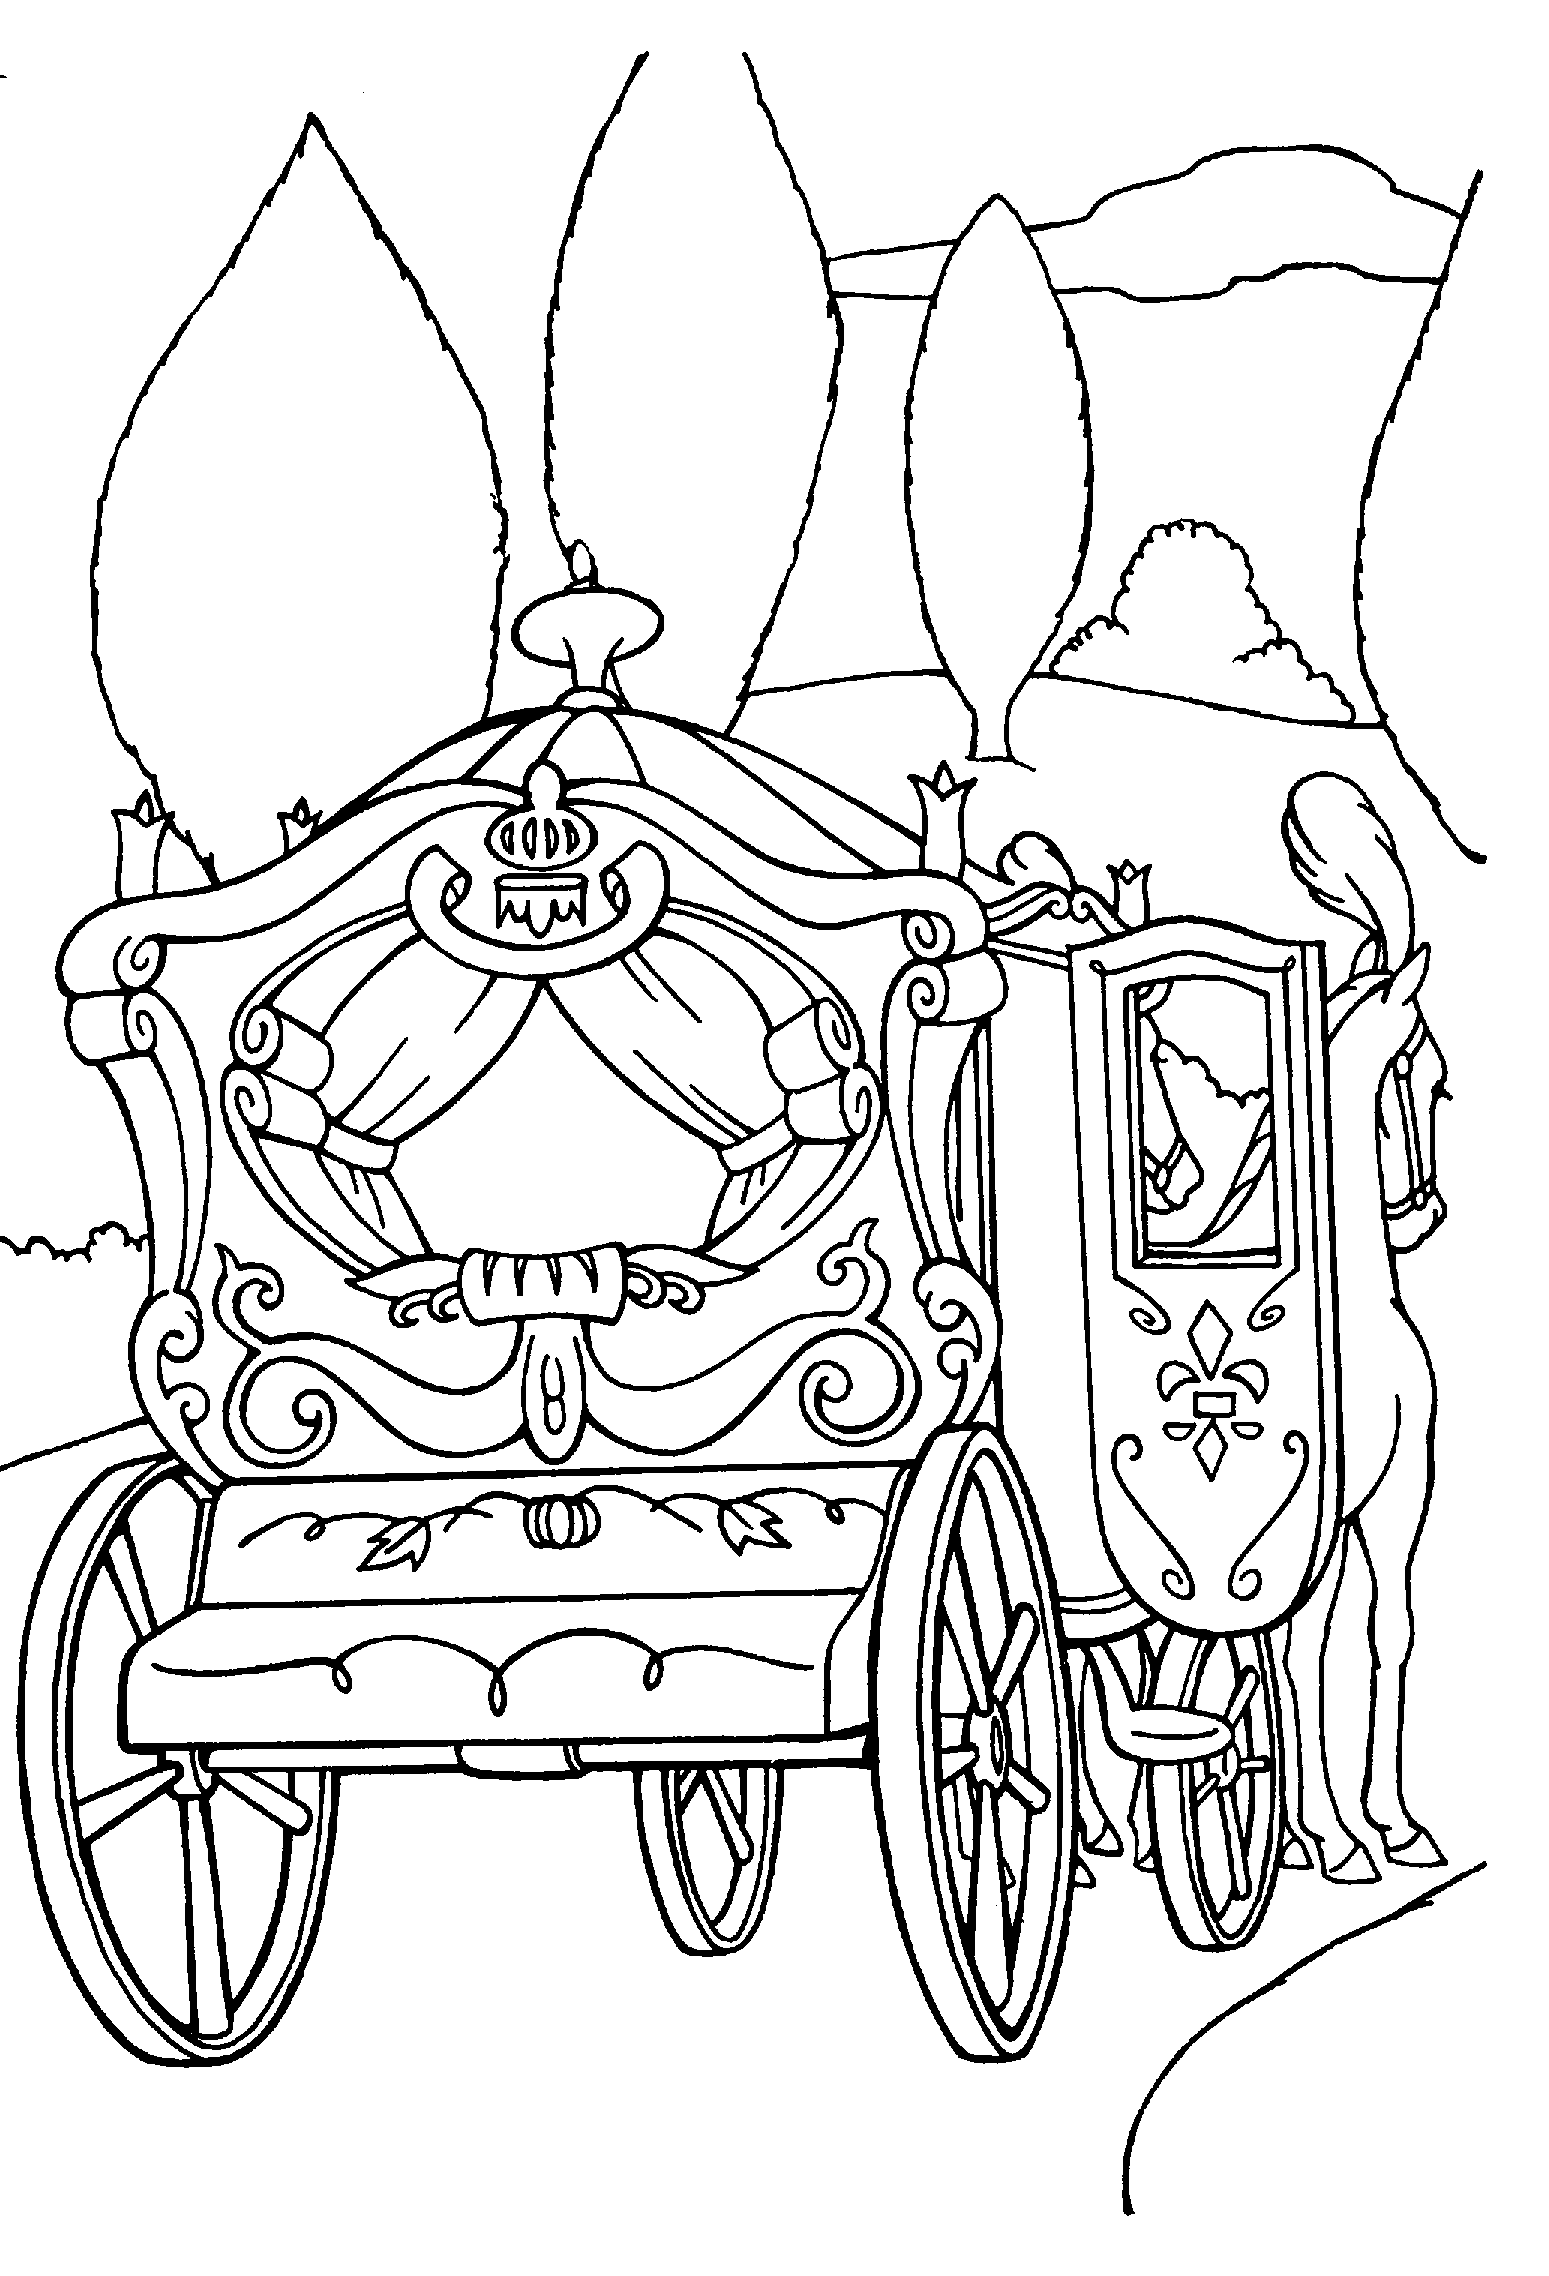 Cinderella Coach Coloring Pages Printable - Coloring Pages For All ...